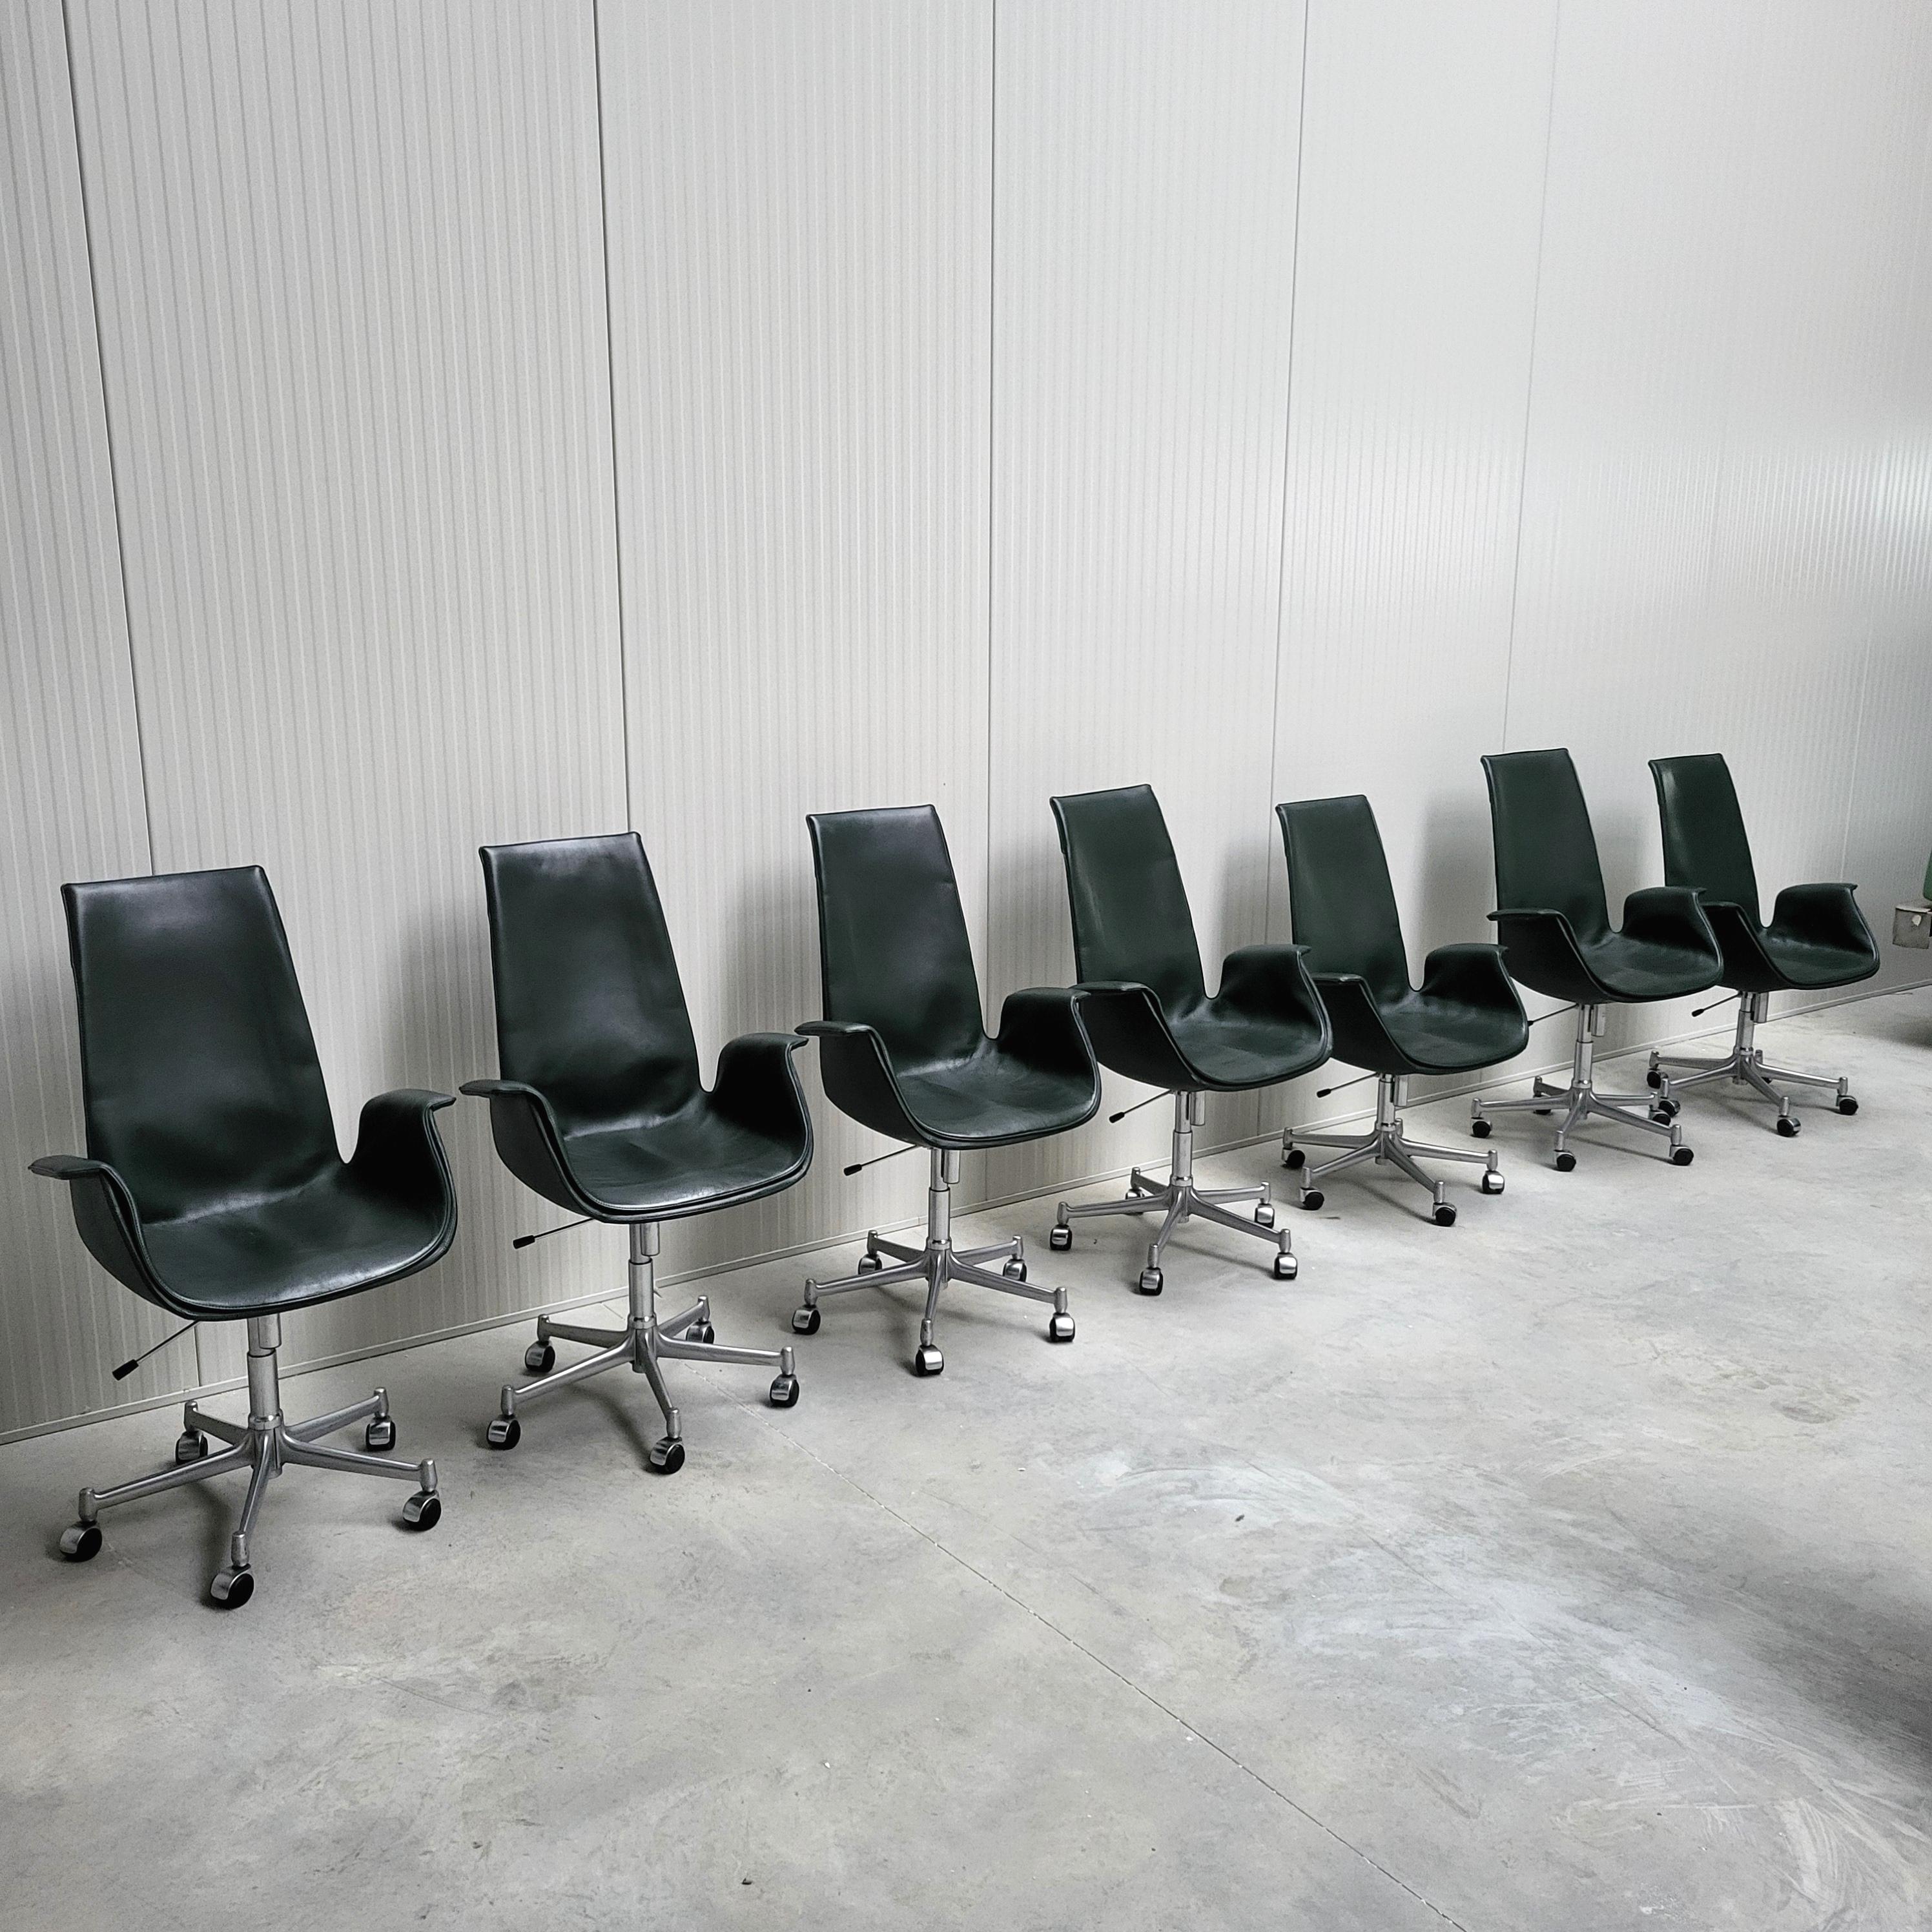 This fine example of the FK6725 Bird office chairs was designed by Jorgen Kastholm & Preben Fabricius in the early 60s and produced by Walter Knoll in the 1990s. 

The so called 